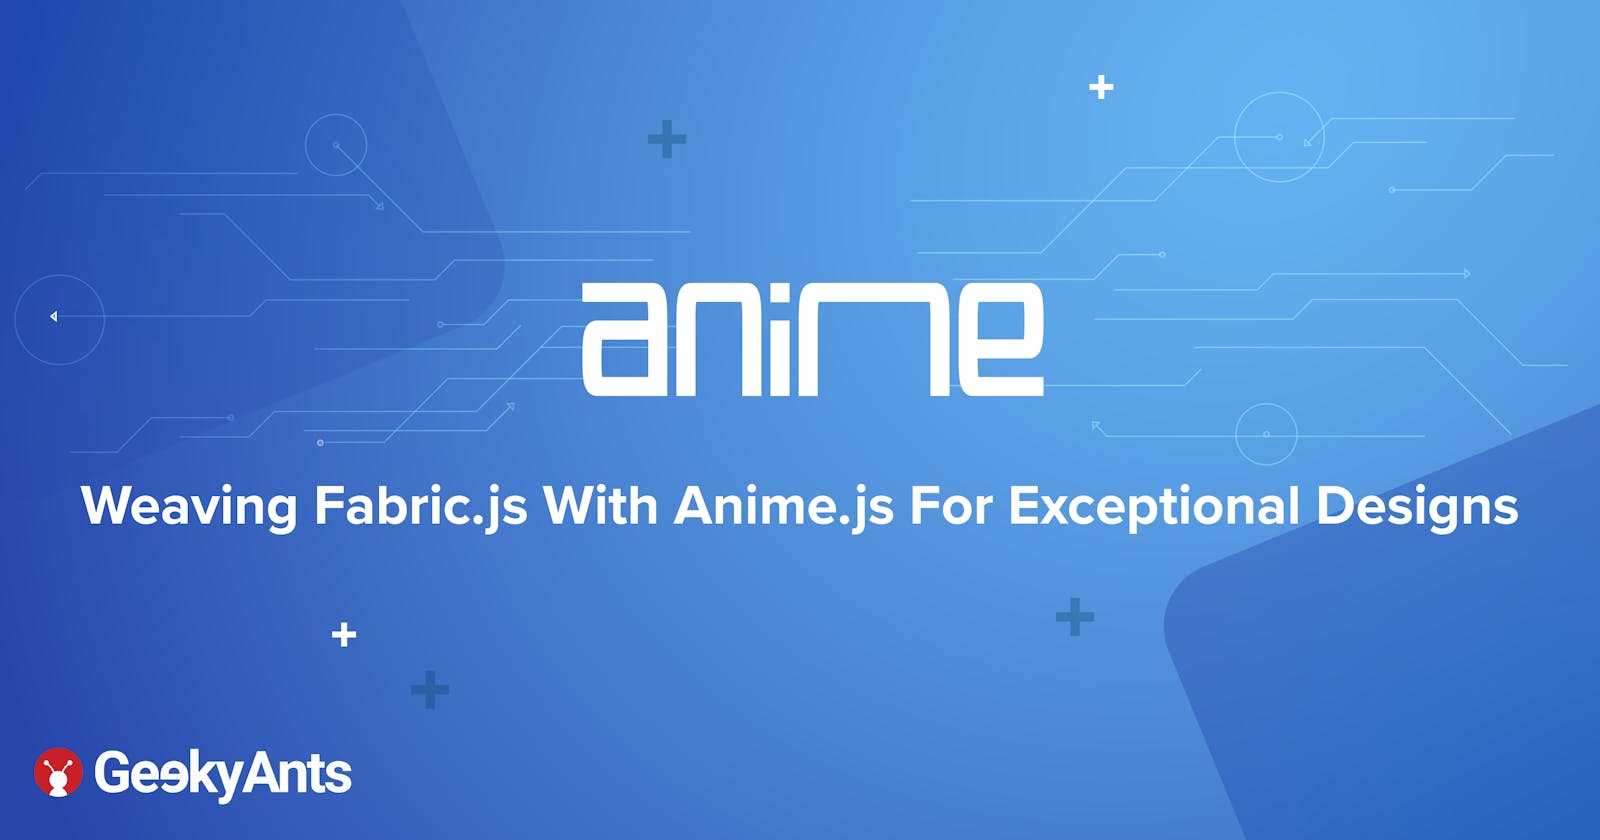 Weaving Fabric.js With Anime.js For Exceptional Designs